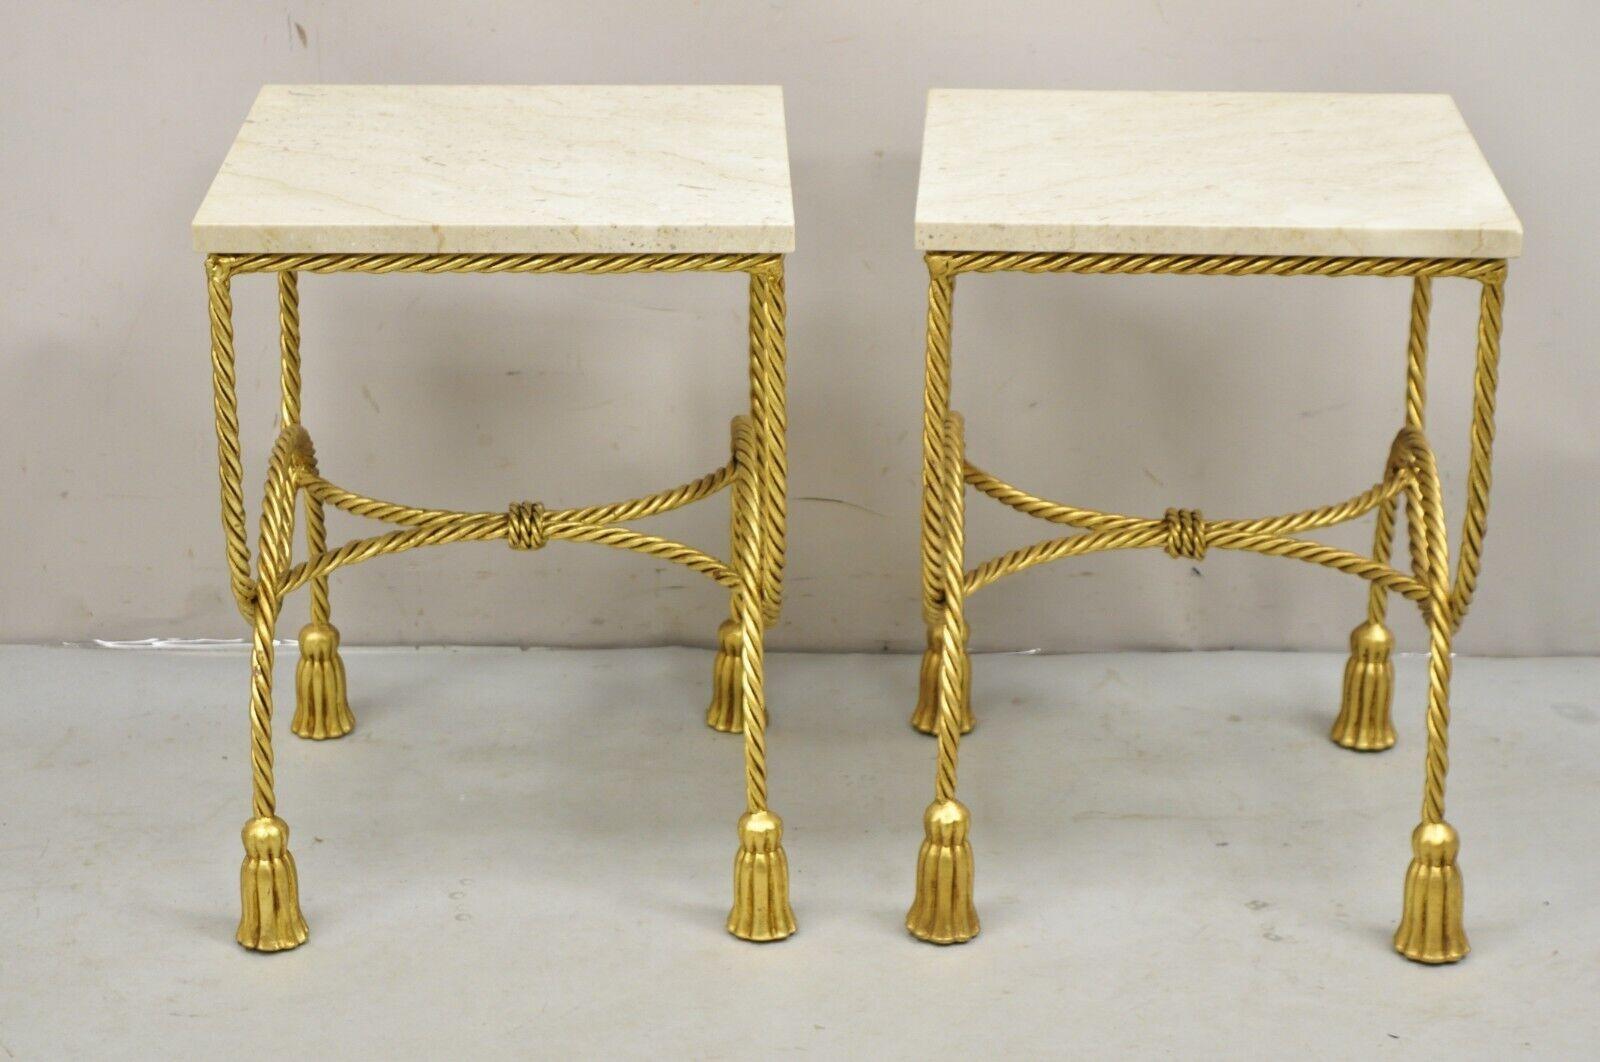 Italian Hollywood Regency Gold Gilt Iron Rope Tassel Marble Top Side Tables - a Pair. Item features marble tops, tassel form feet, iron metal scrolling rope design frame, gold leaf gilt finish, very nice vintage side tables, quality Italian